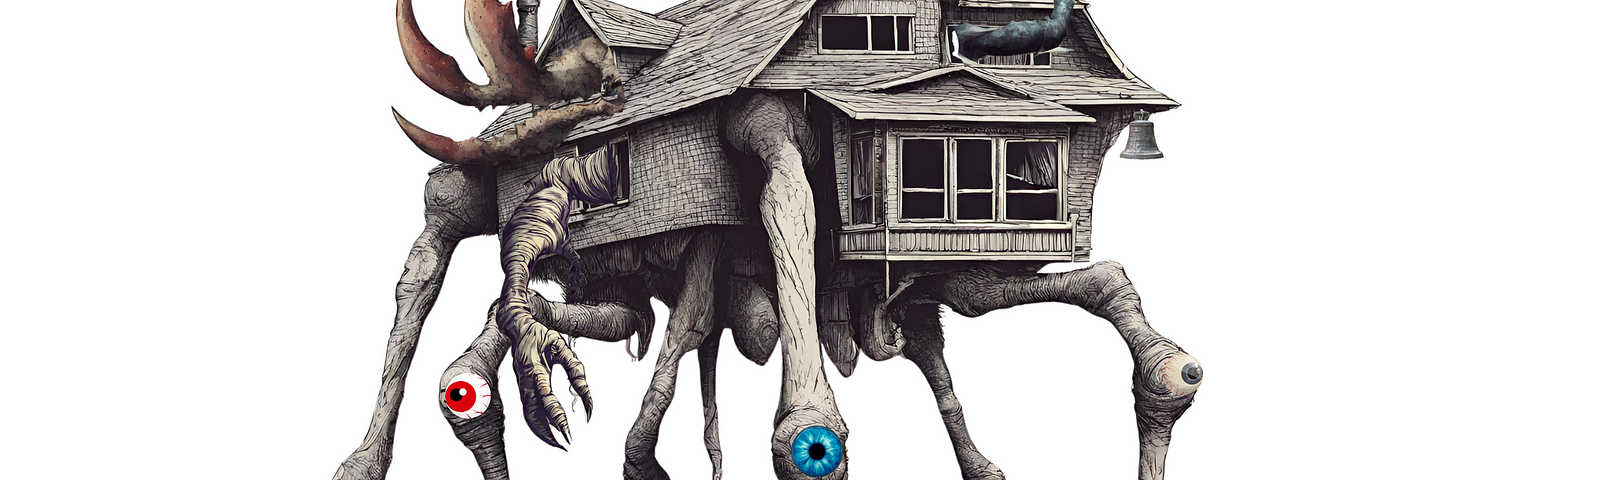 A shambling creature resembling a house with insect legs and multiple eyes goes for a walk.